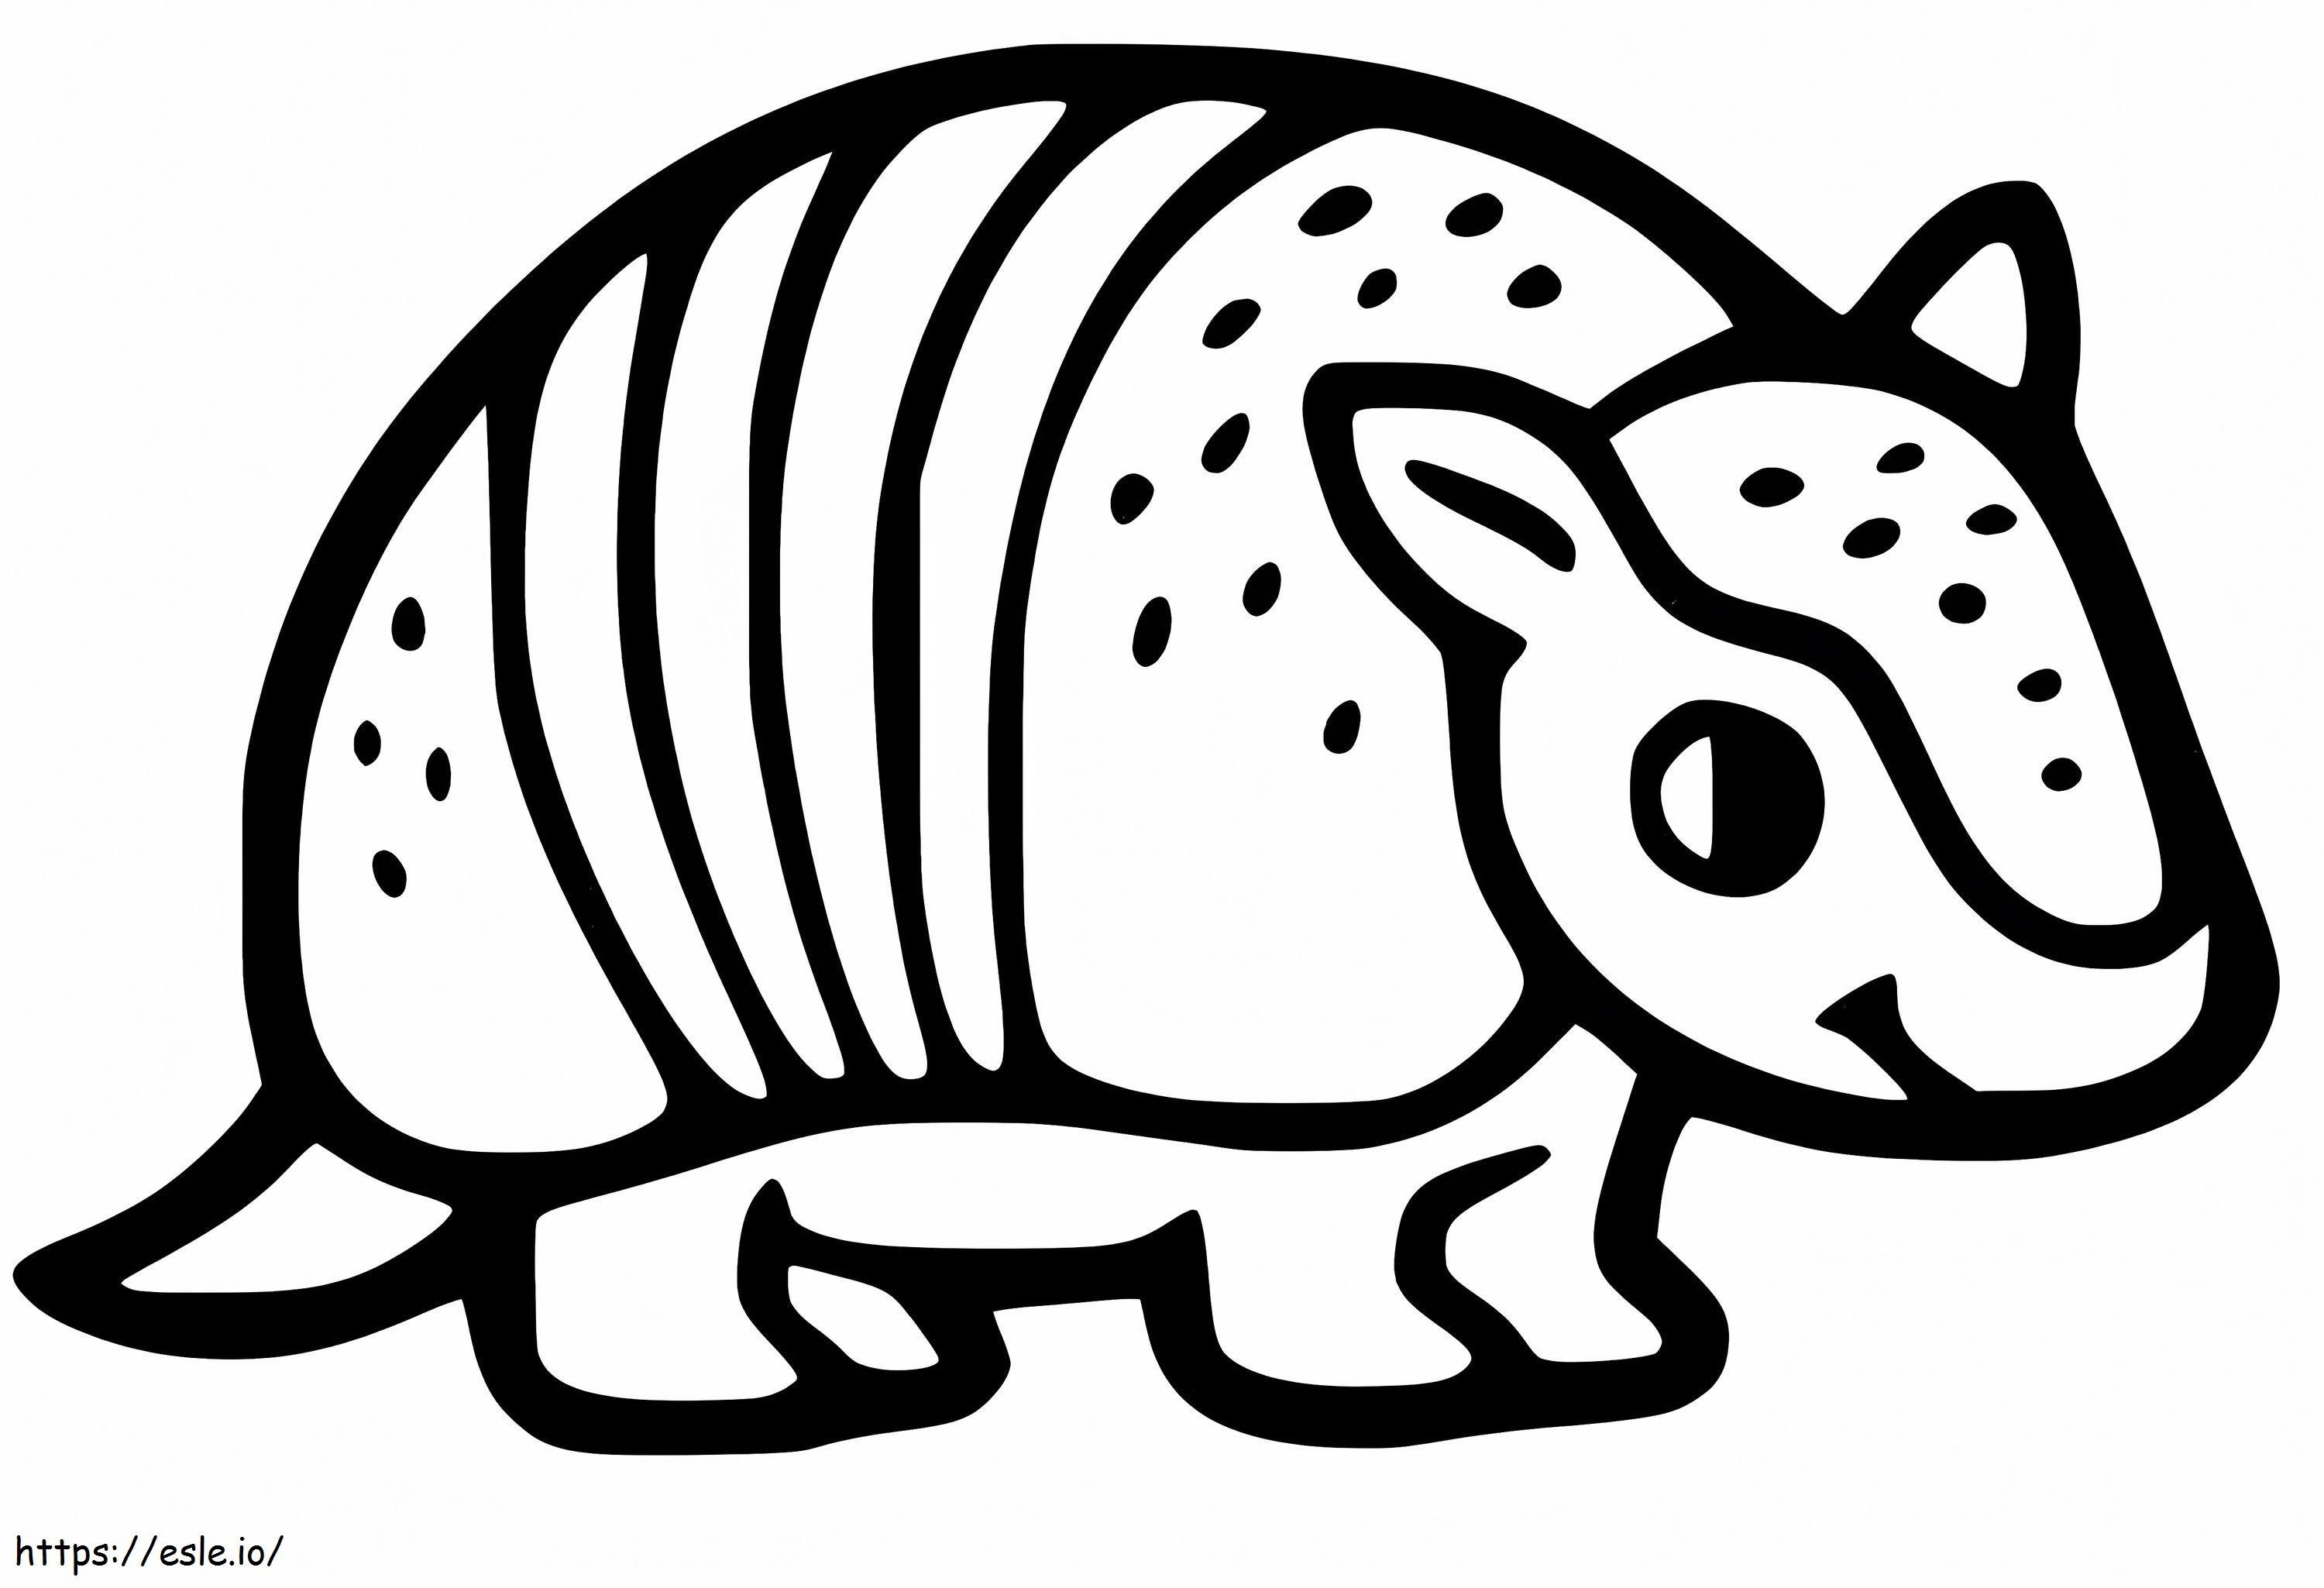 Little Armadilo Smiling coloring page